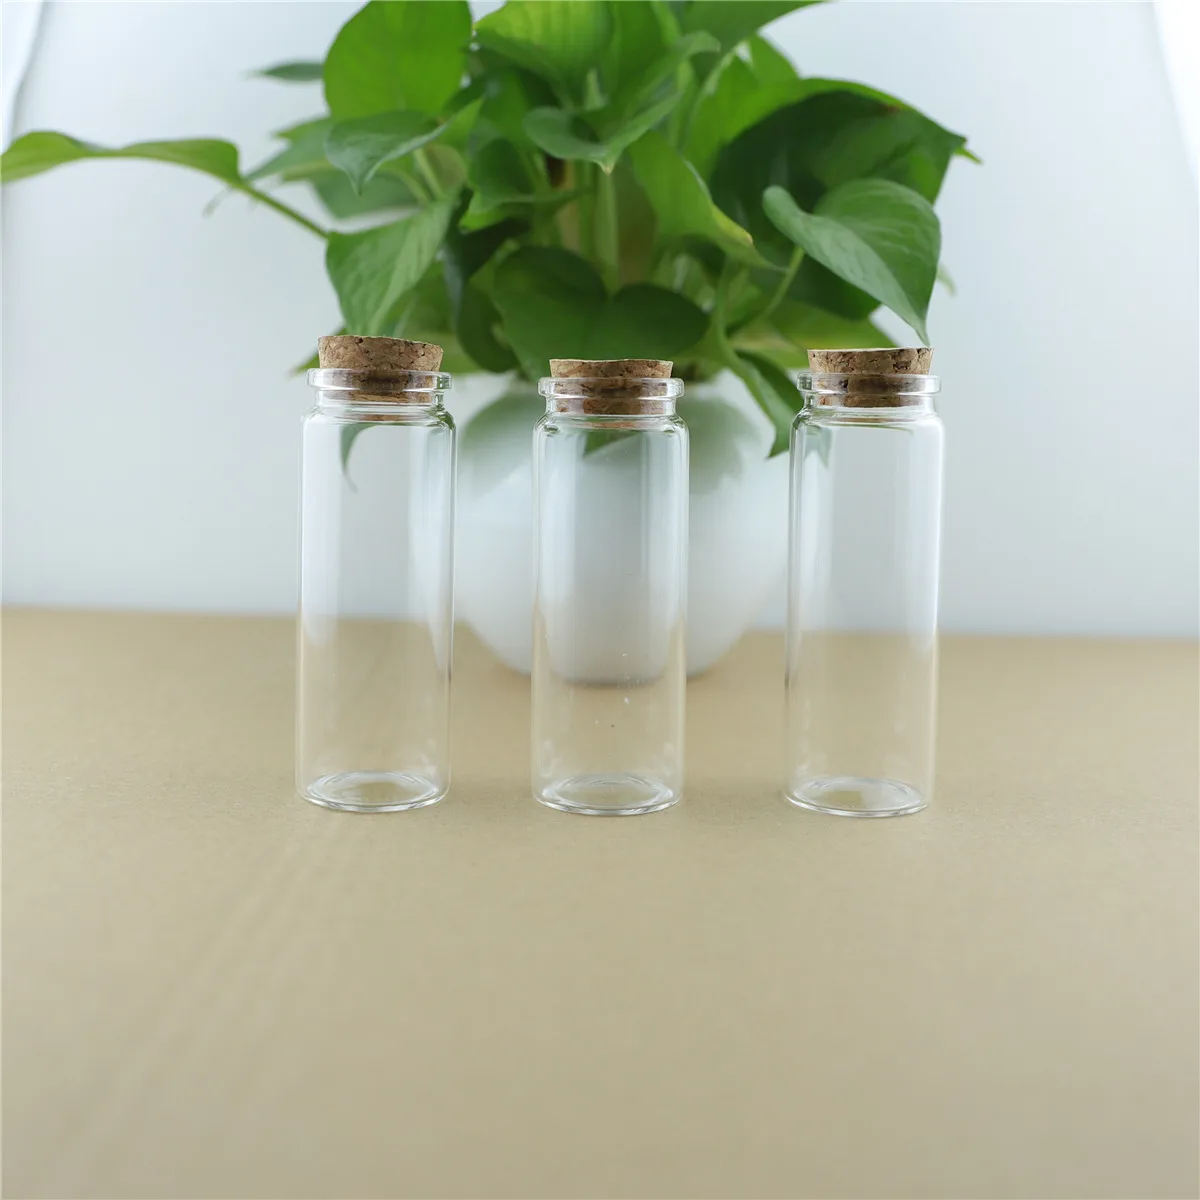 

24PCS/lot 37*100mm 80ml Glass Bottles Storage Jar for Spice Corks spicy Bottle Candy Containers Vials With Cork Stopper